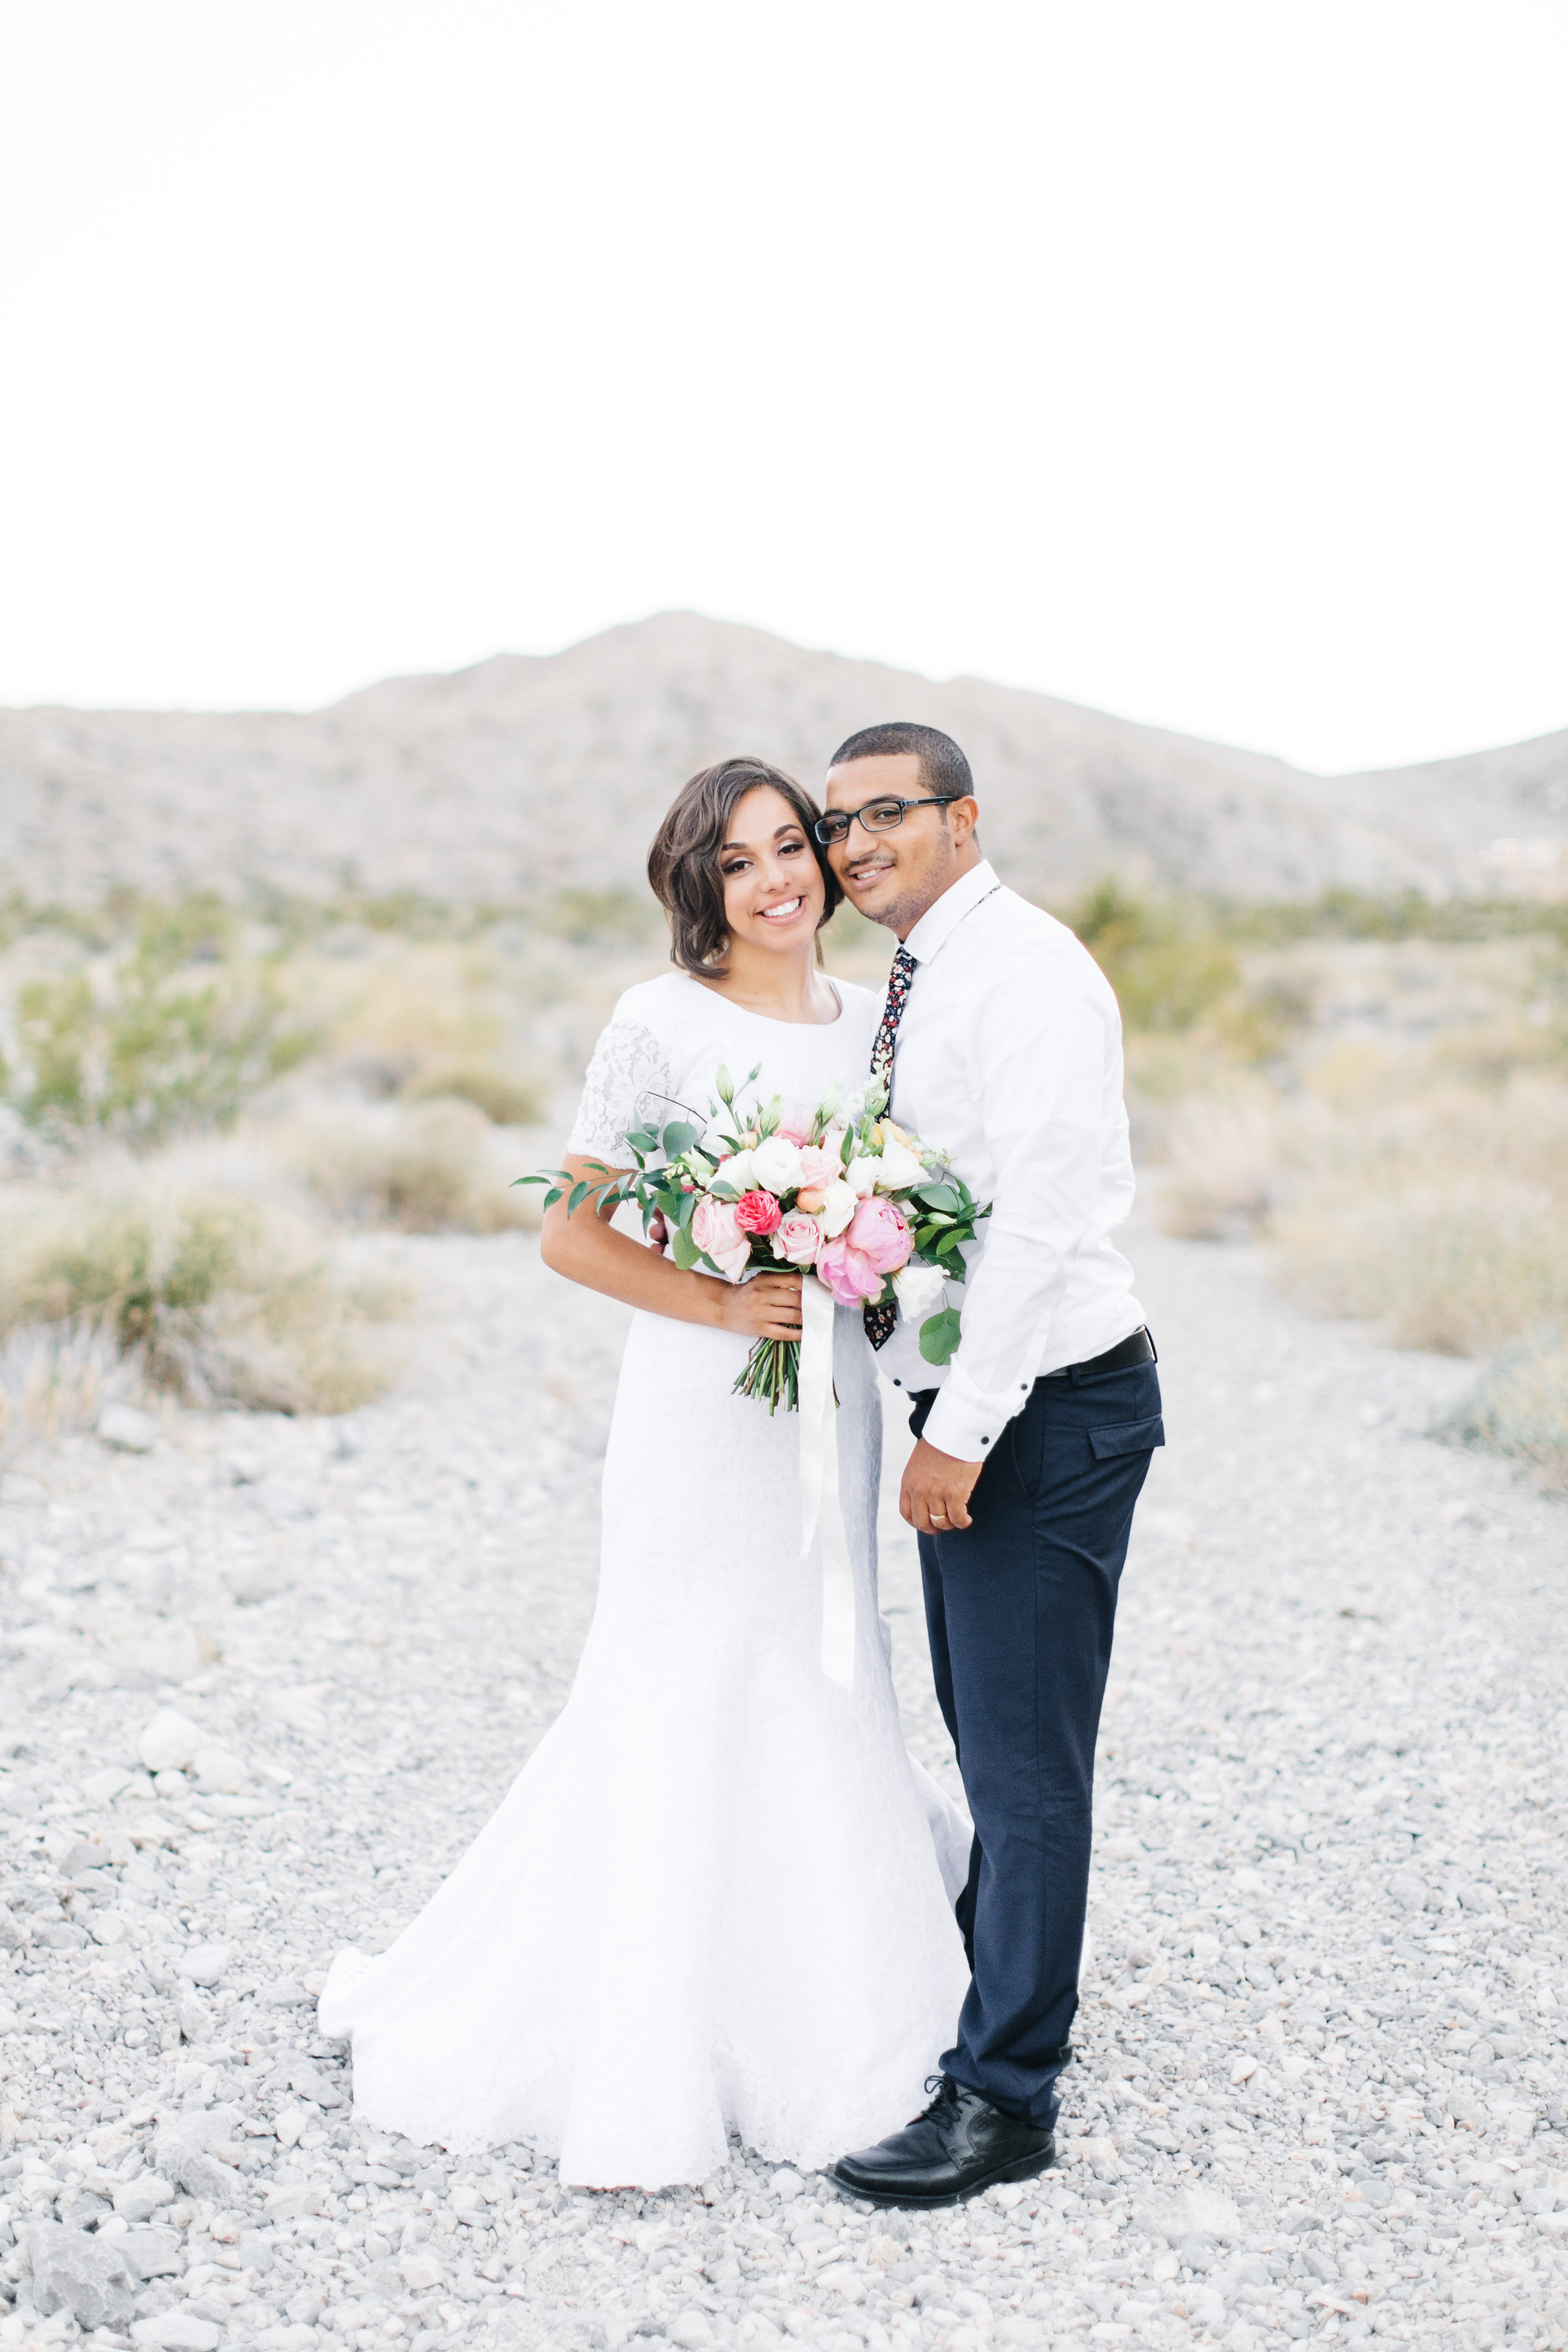 A Sweet Styled Shoot At Ethel M S Chocolate Factory Las Vegas Black Nuptials